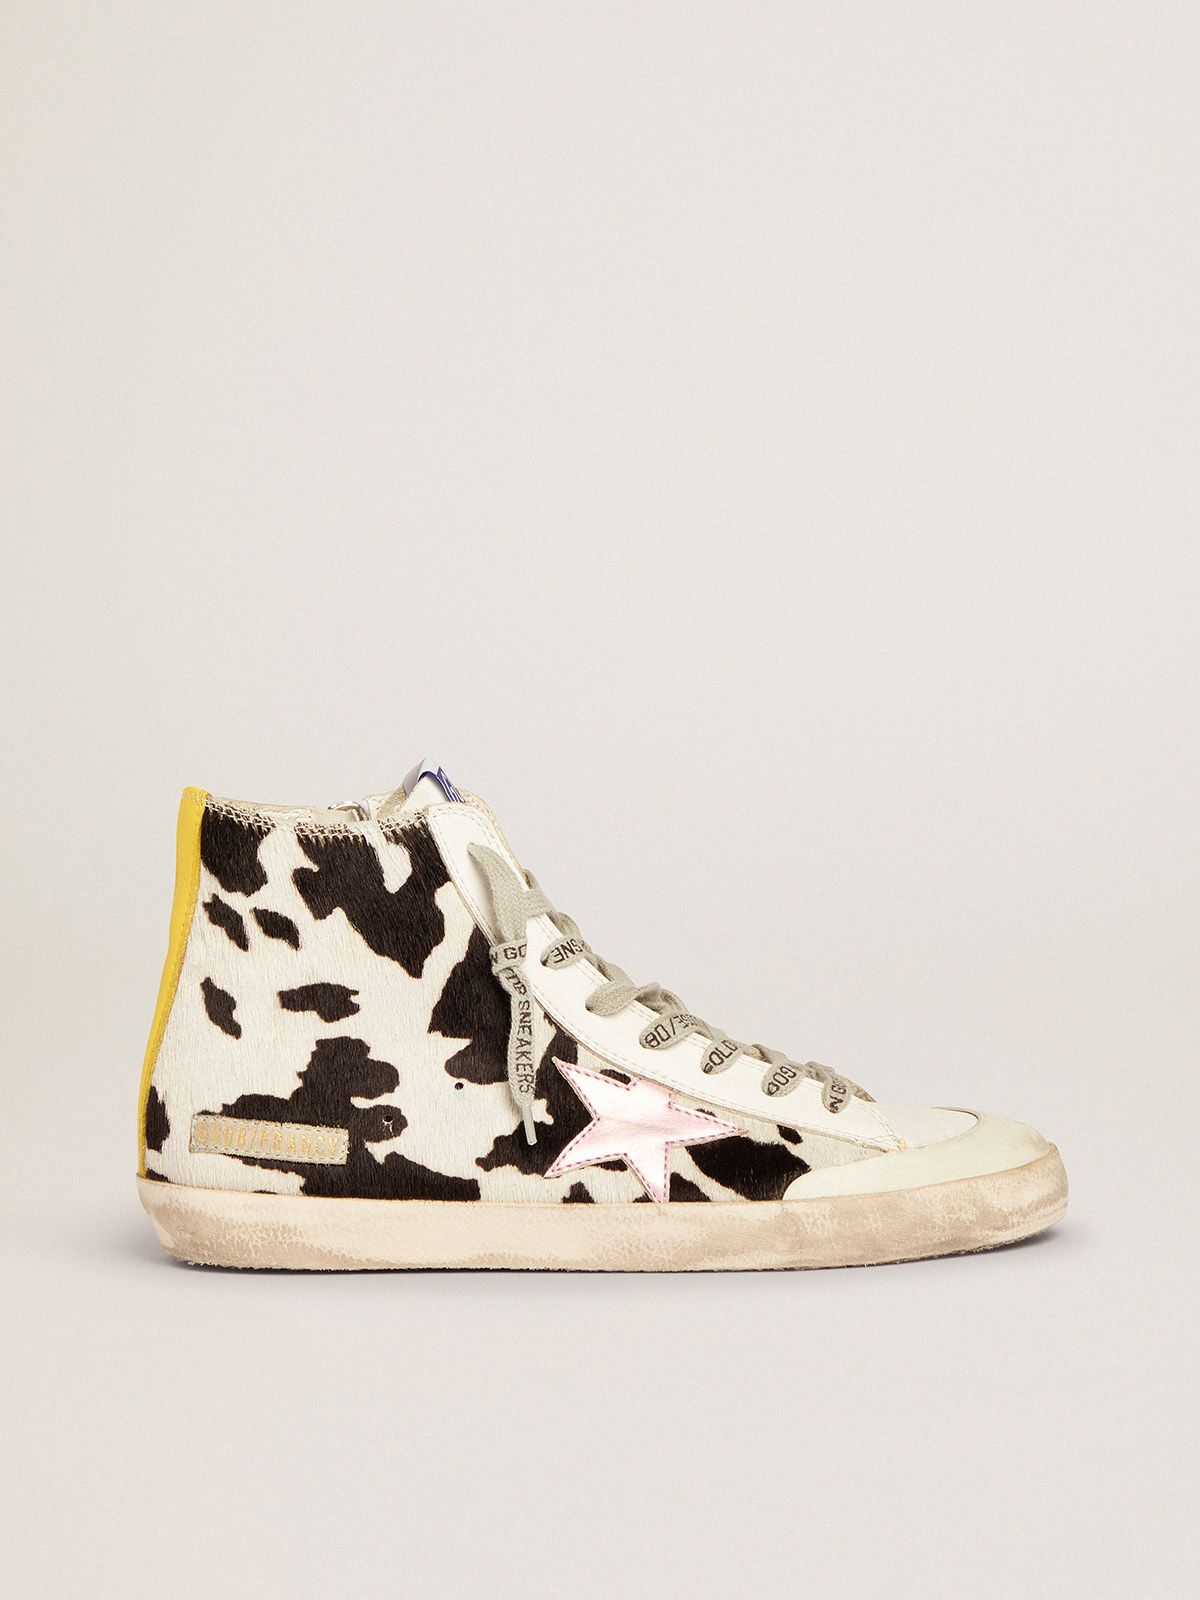 Francy Penstar sneakers in cow-print pony skin with pink laminated leather star